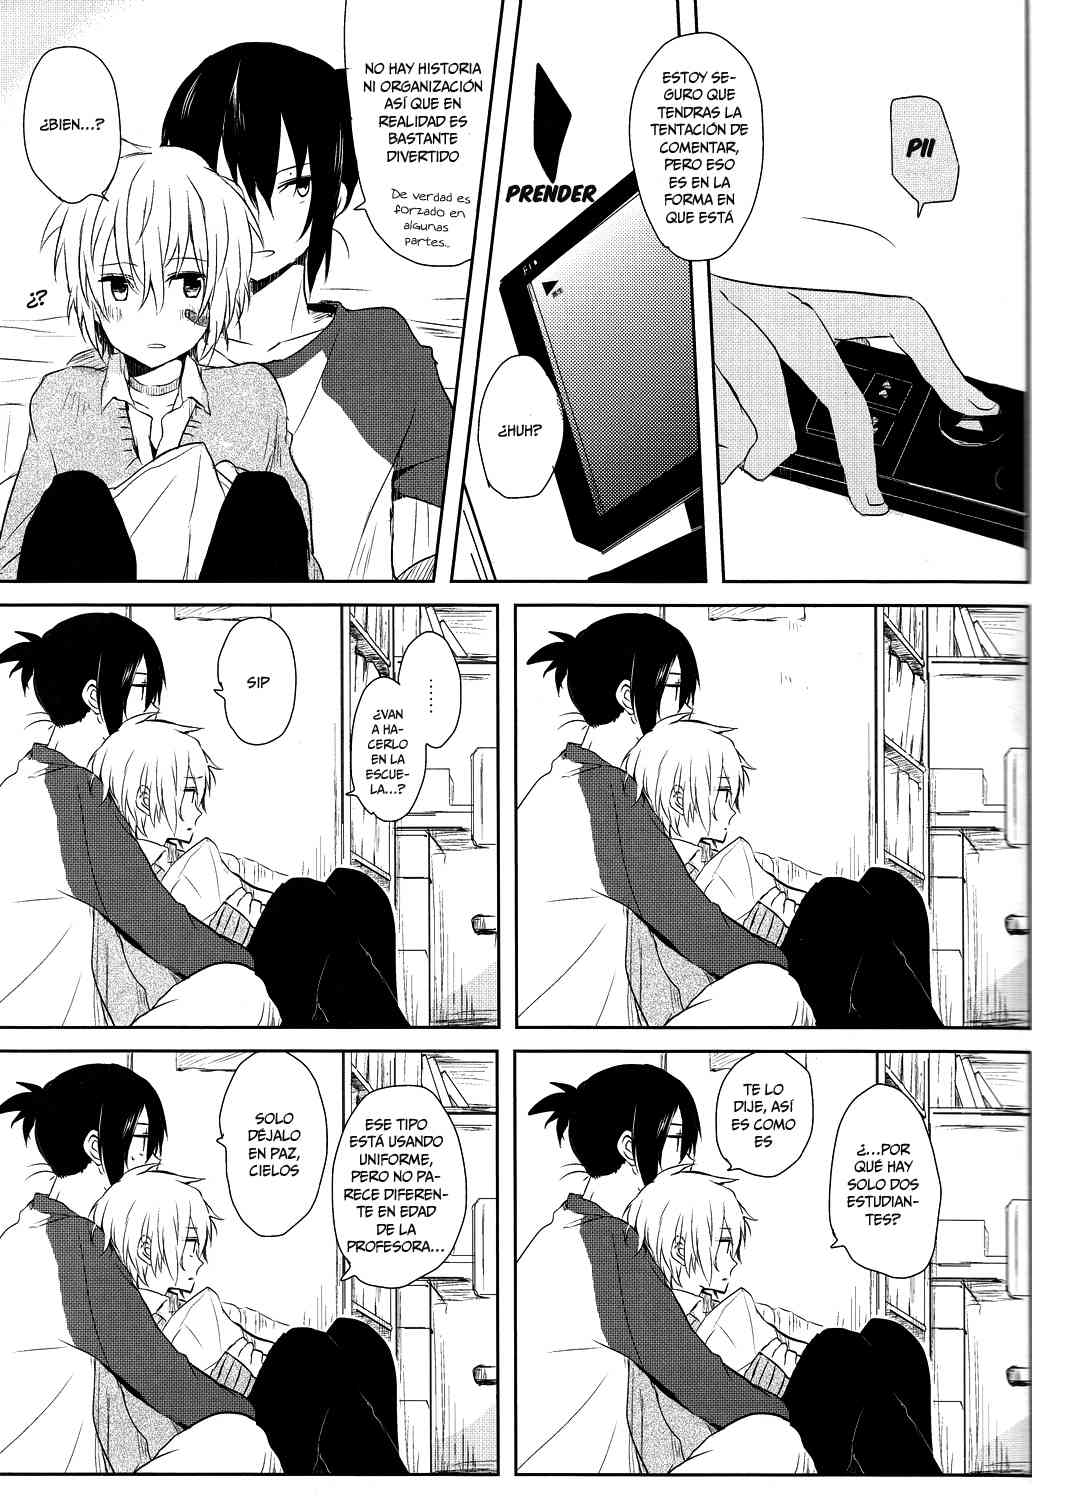 Doujinshi No.6 Determine Your Desire, then Do It Chapter-1 - 11